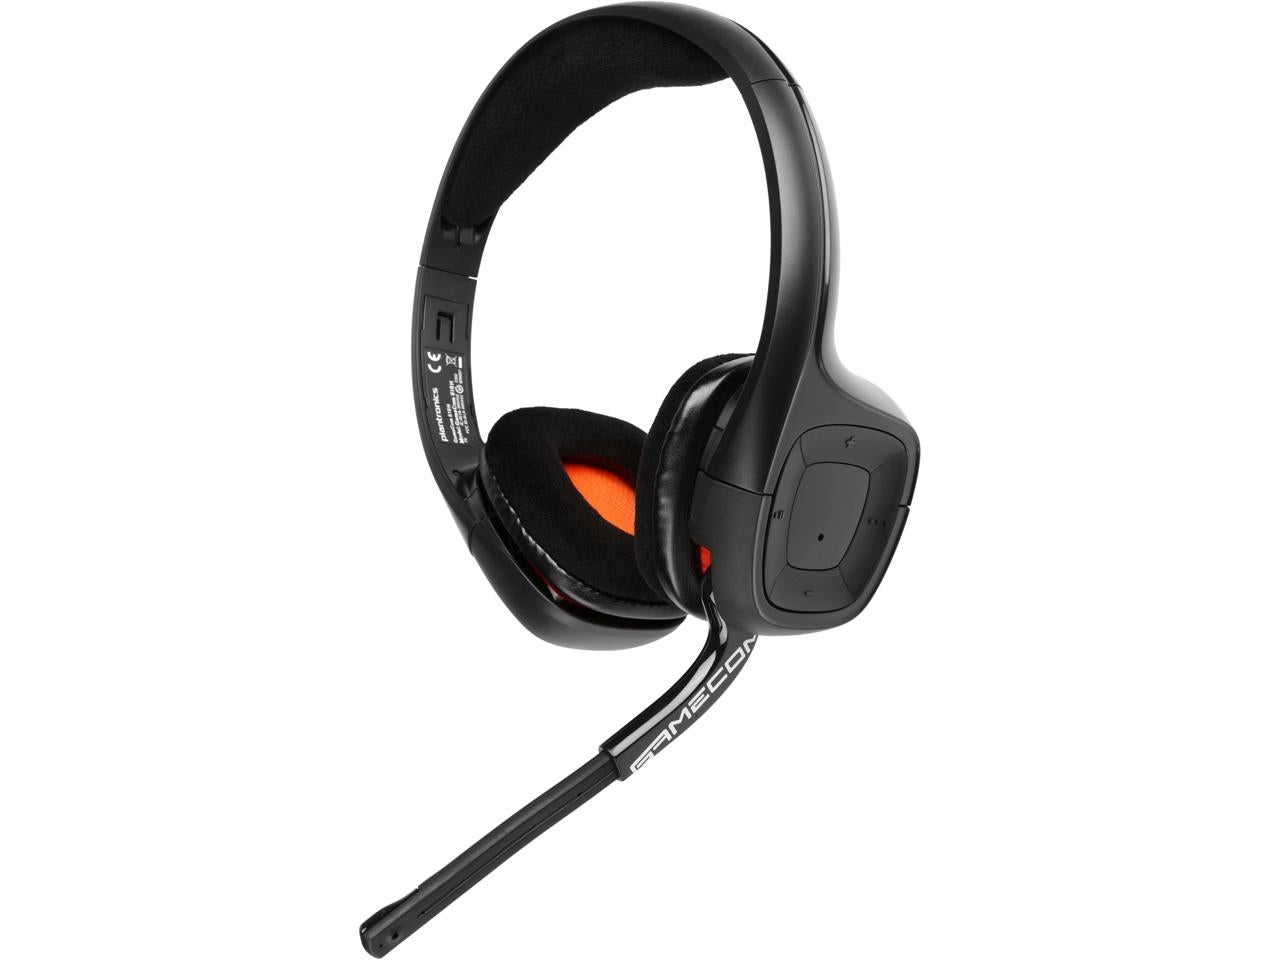 Image for Get a Plantronics P80 Wireless Gaming Headset for PS4 & PC for $10 Today